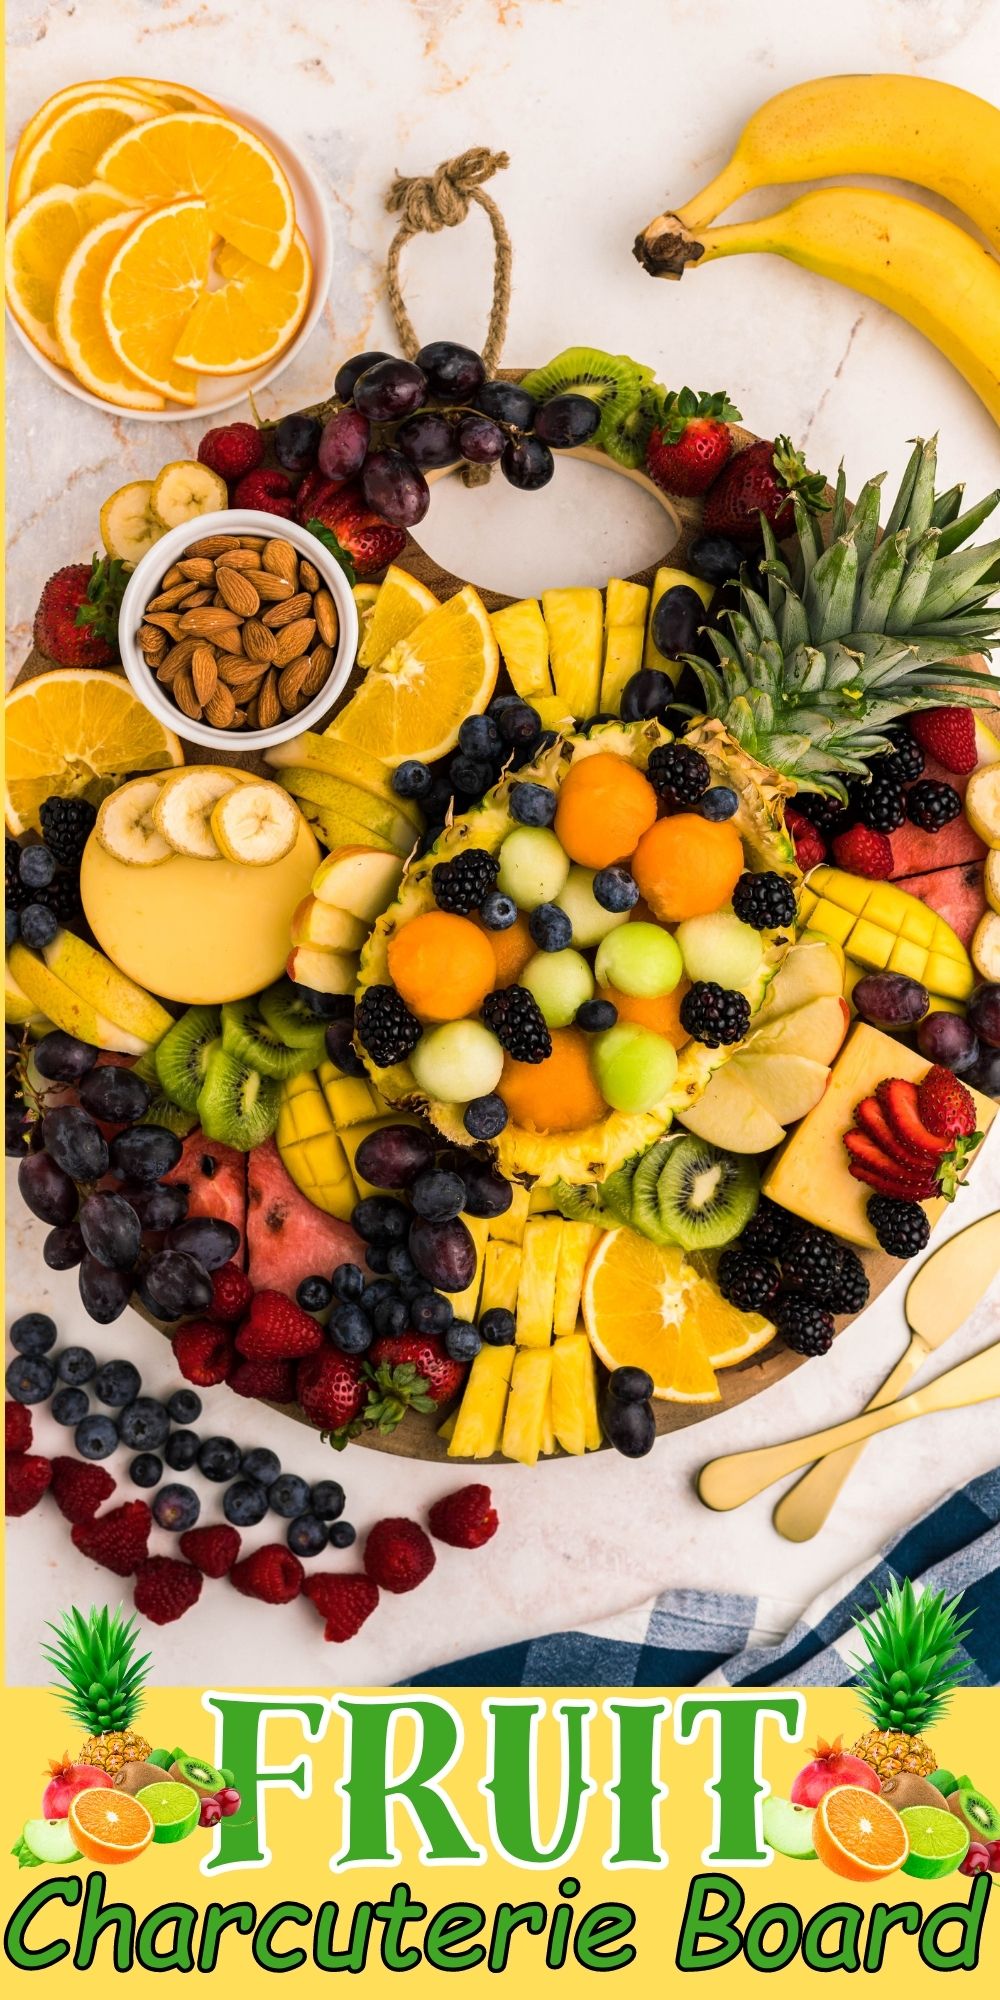 When creating your own Fruit Charcuterie Board, the possibilities are endless to make a perfect appetizer!